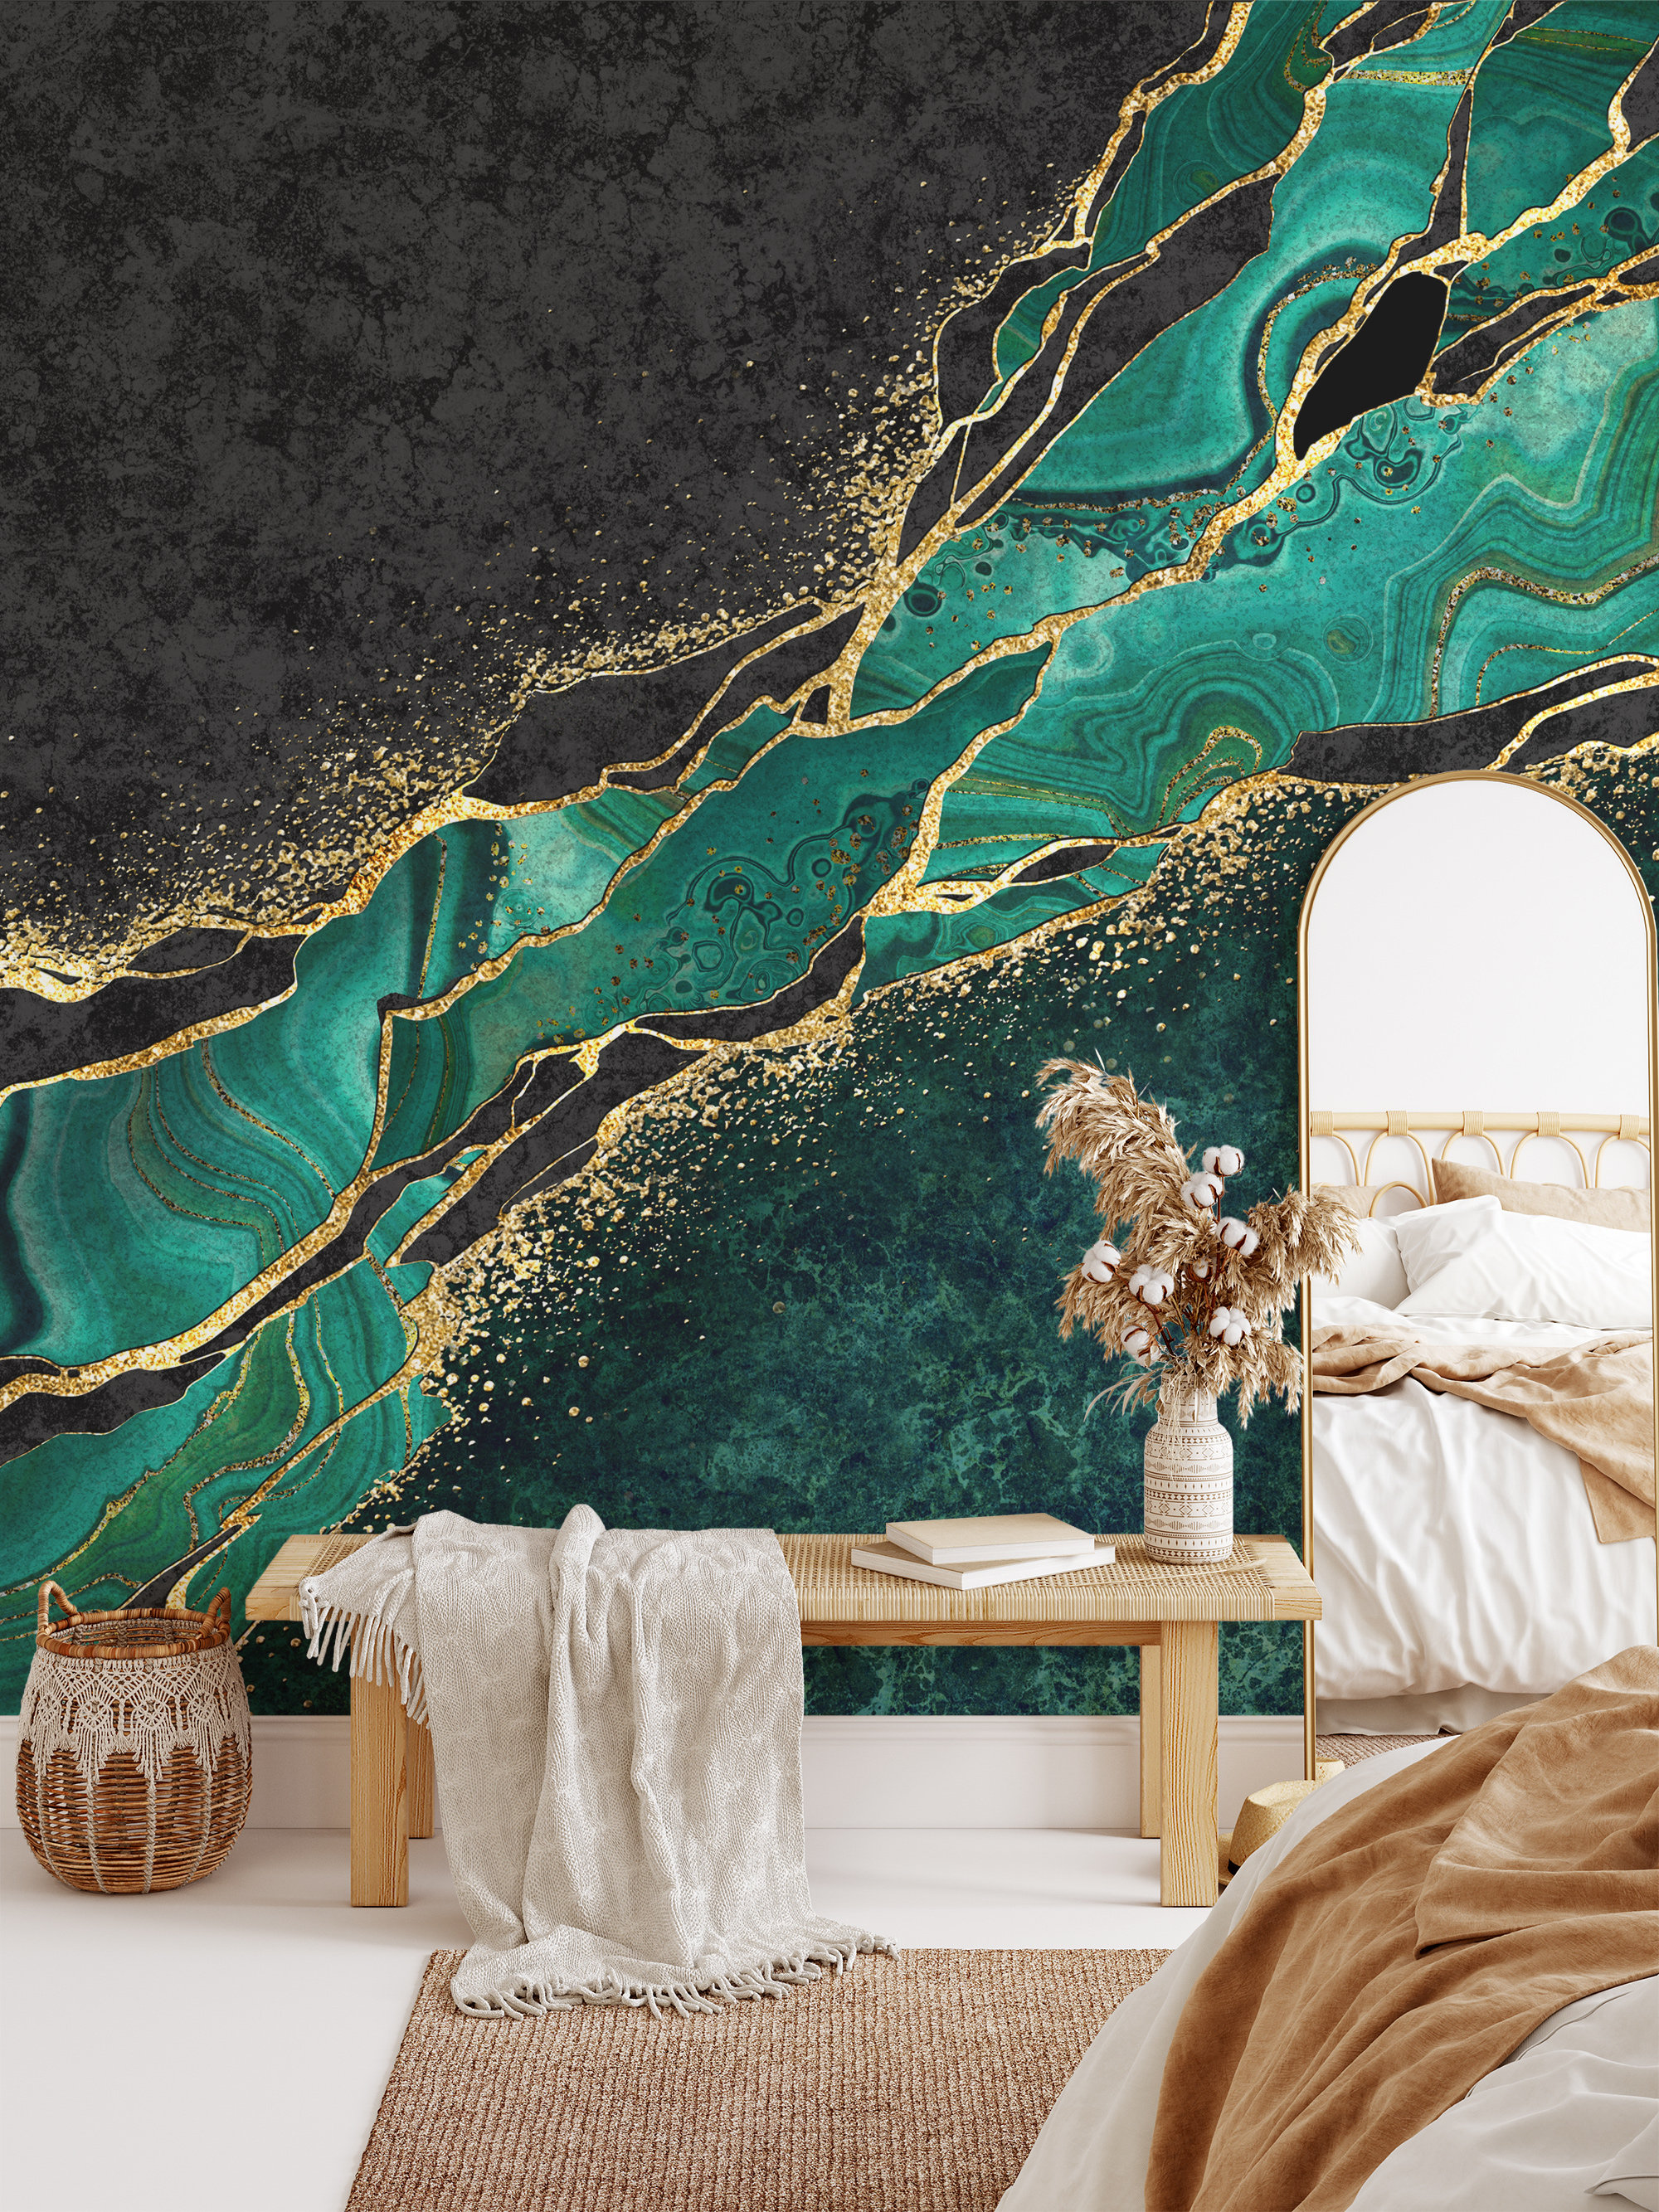 Abstract background fashion fake stone texture malachite emerald green  agate or marble slab with gold glitter veins wavy lines painted  artificial marbled surface artistic marbling illustration Stock Photo by  wacomka 285152244